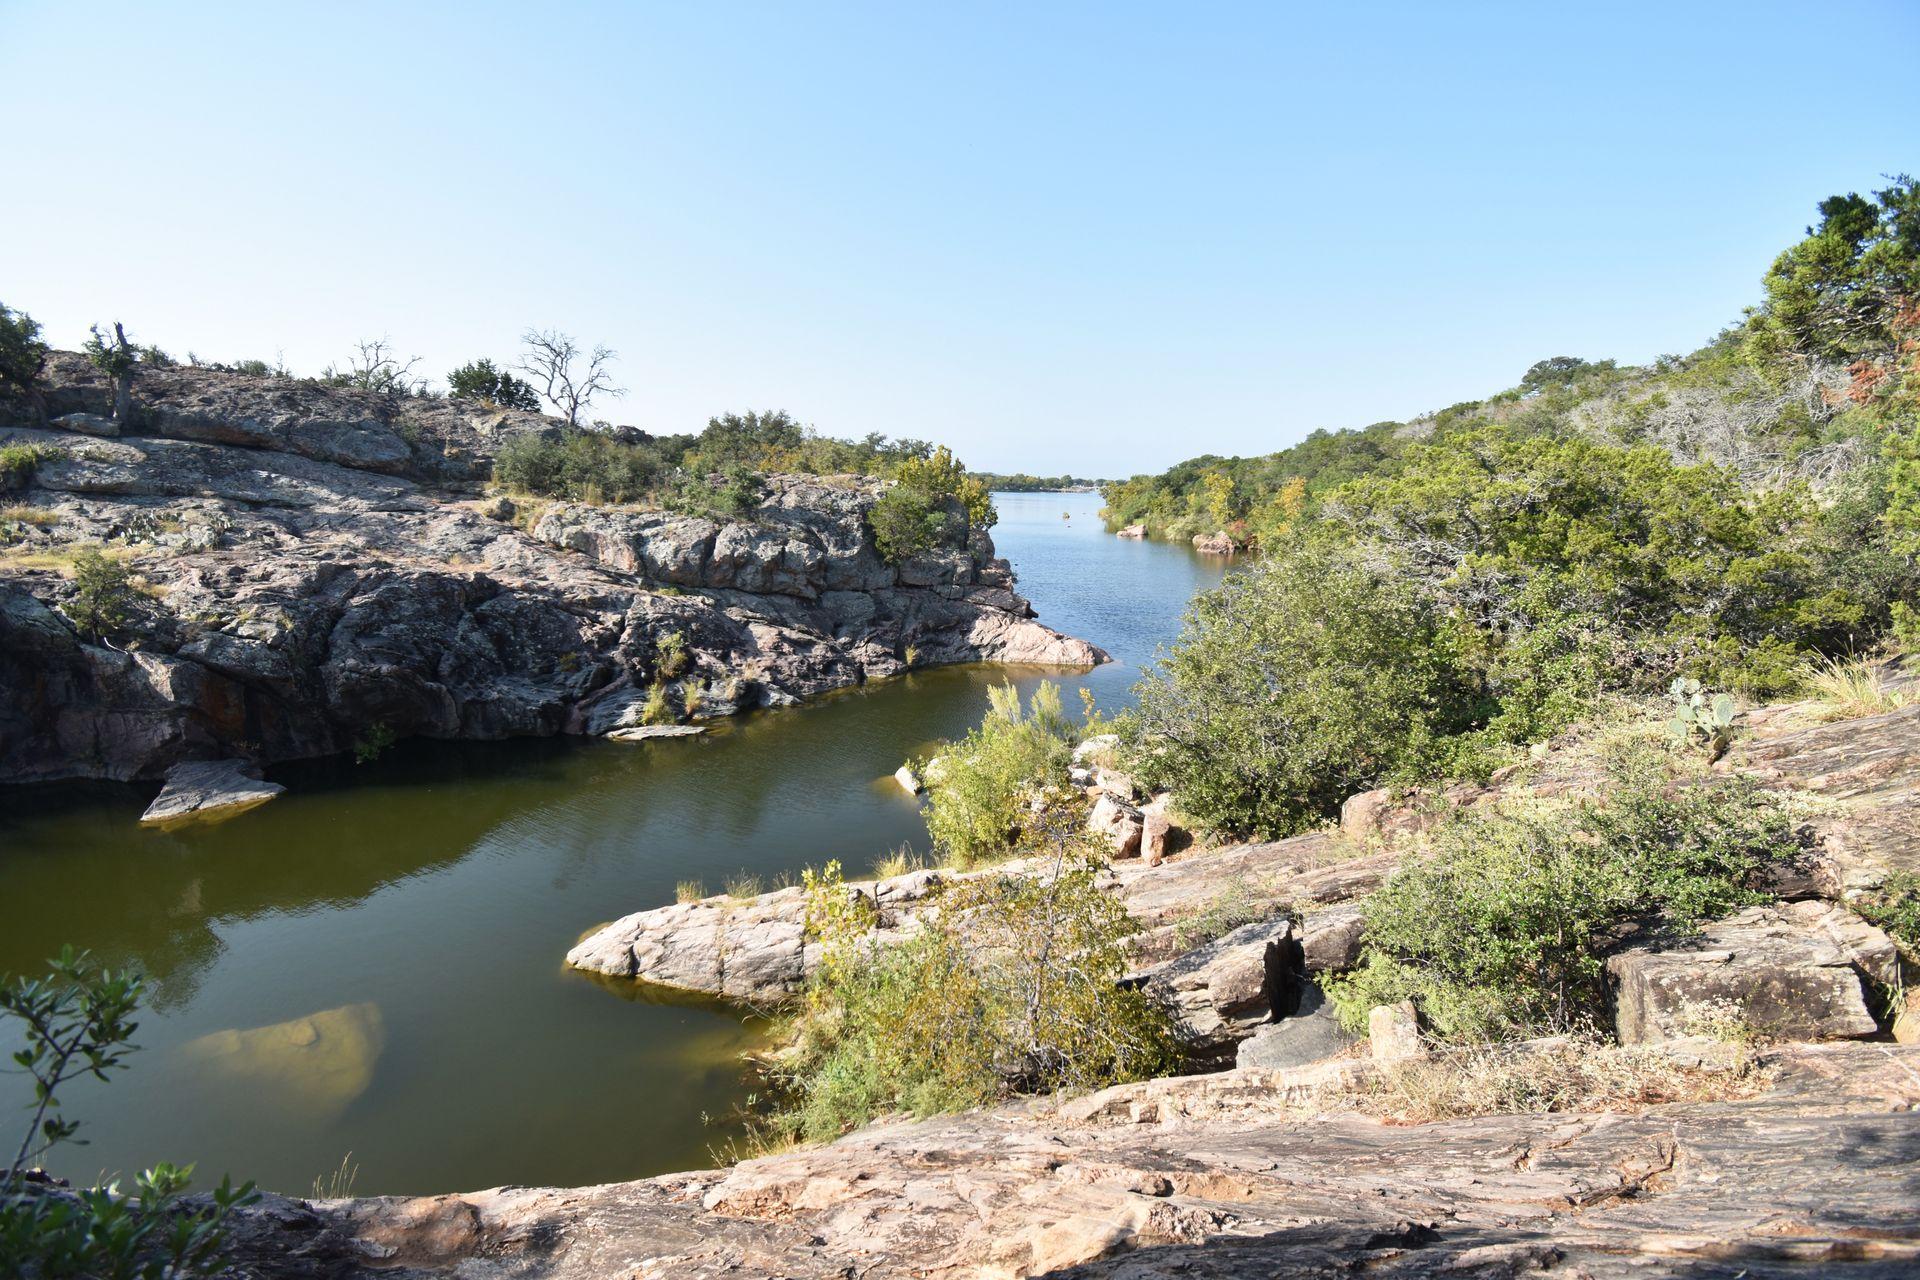 The curved lake at Inks Lake State Park.